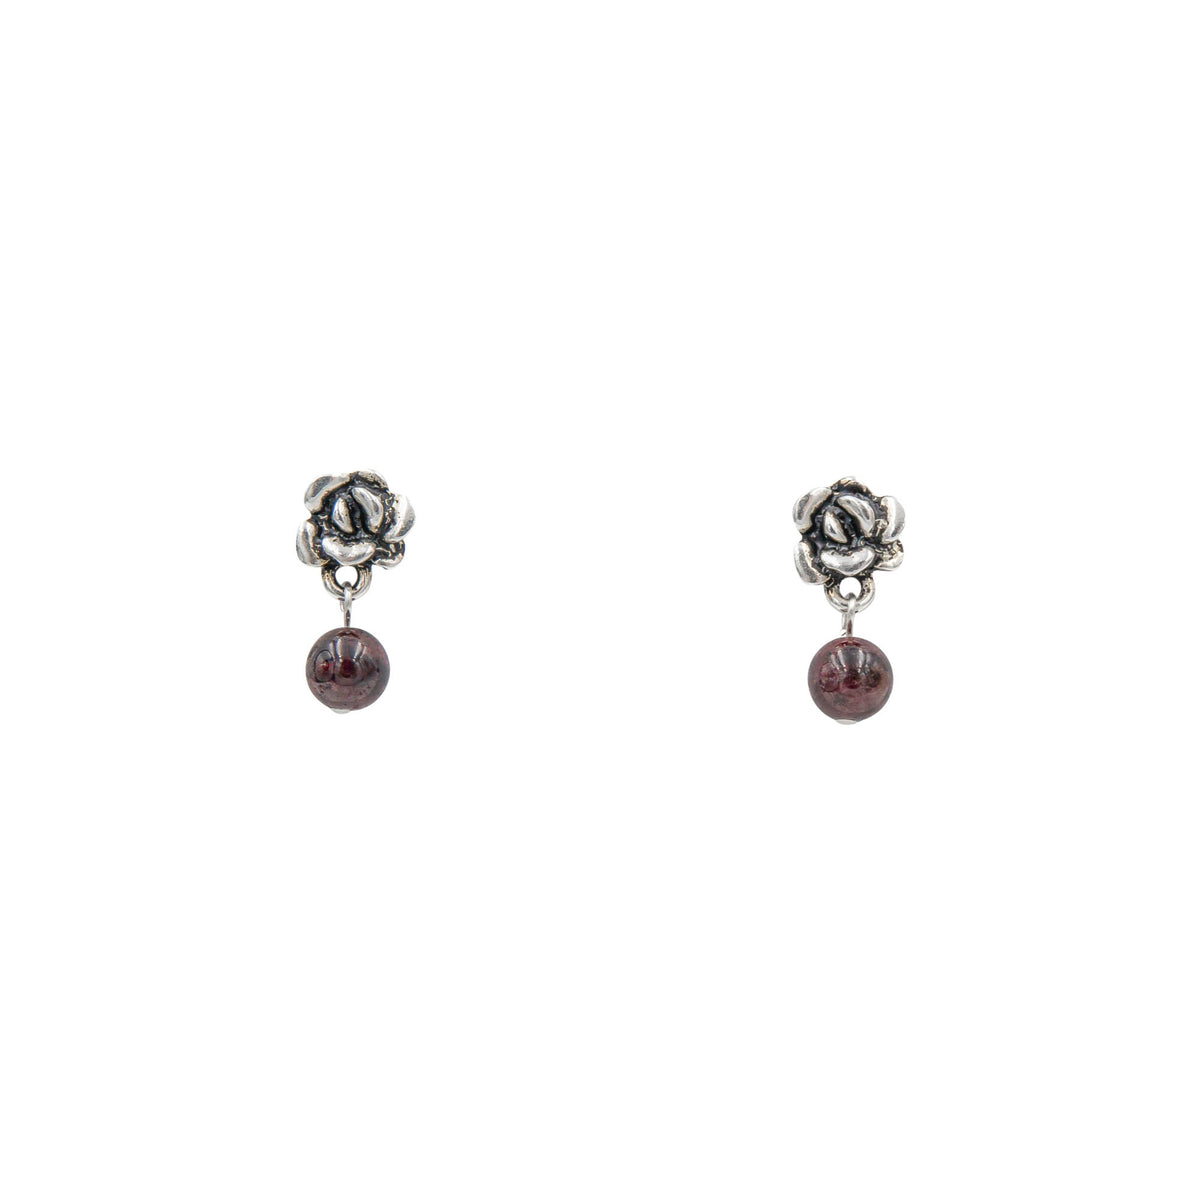 Earth Song Jewelry ~ Luscious wine-red Garnets hang from these beautiful flowering rose posts with Titanium posts wire . 